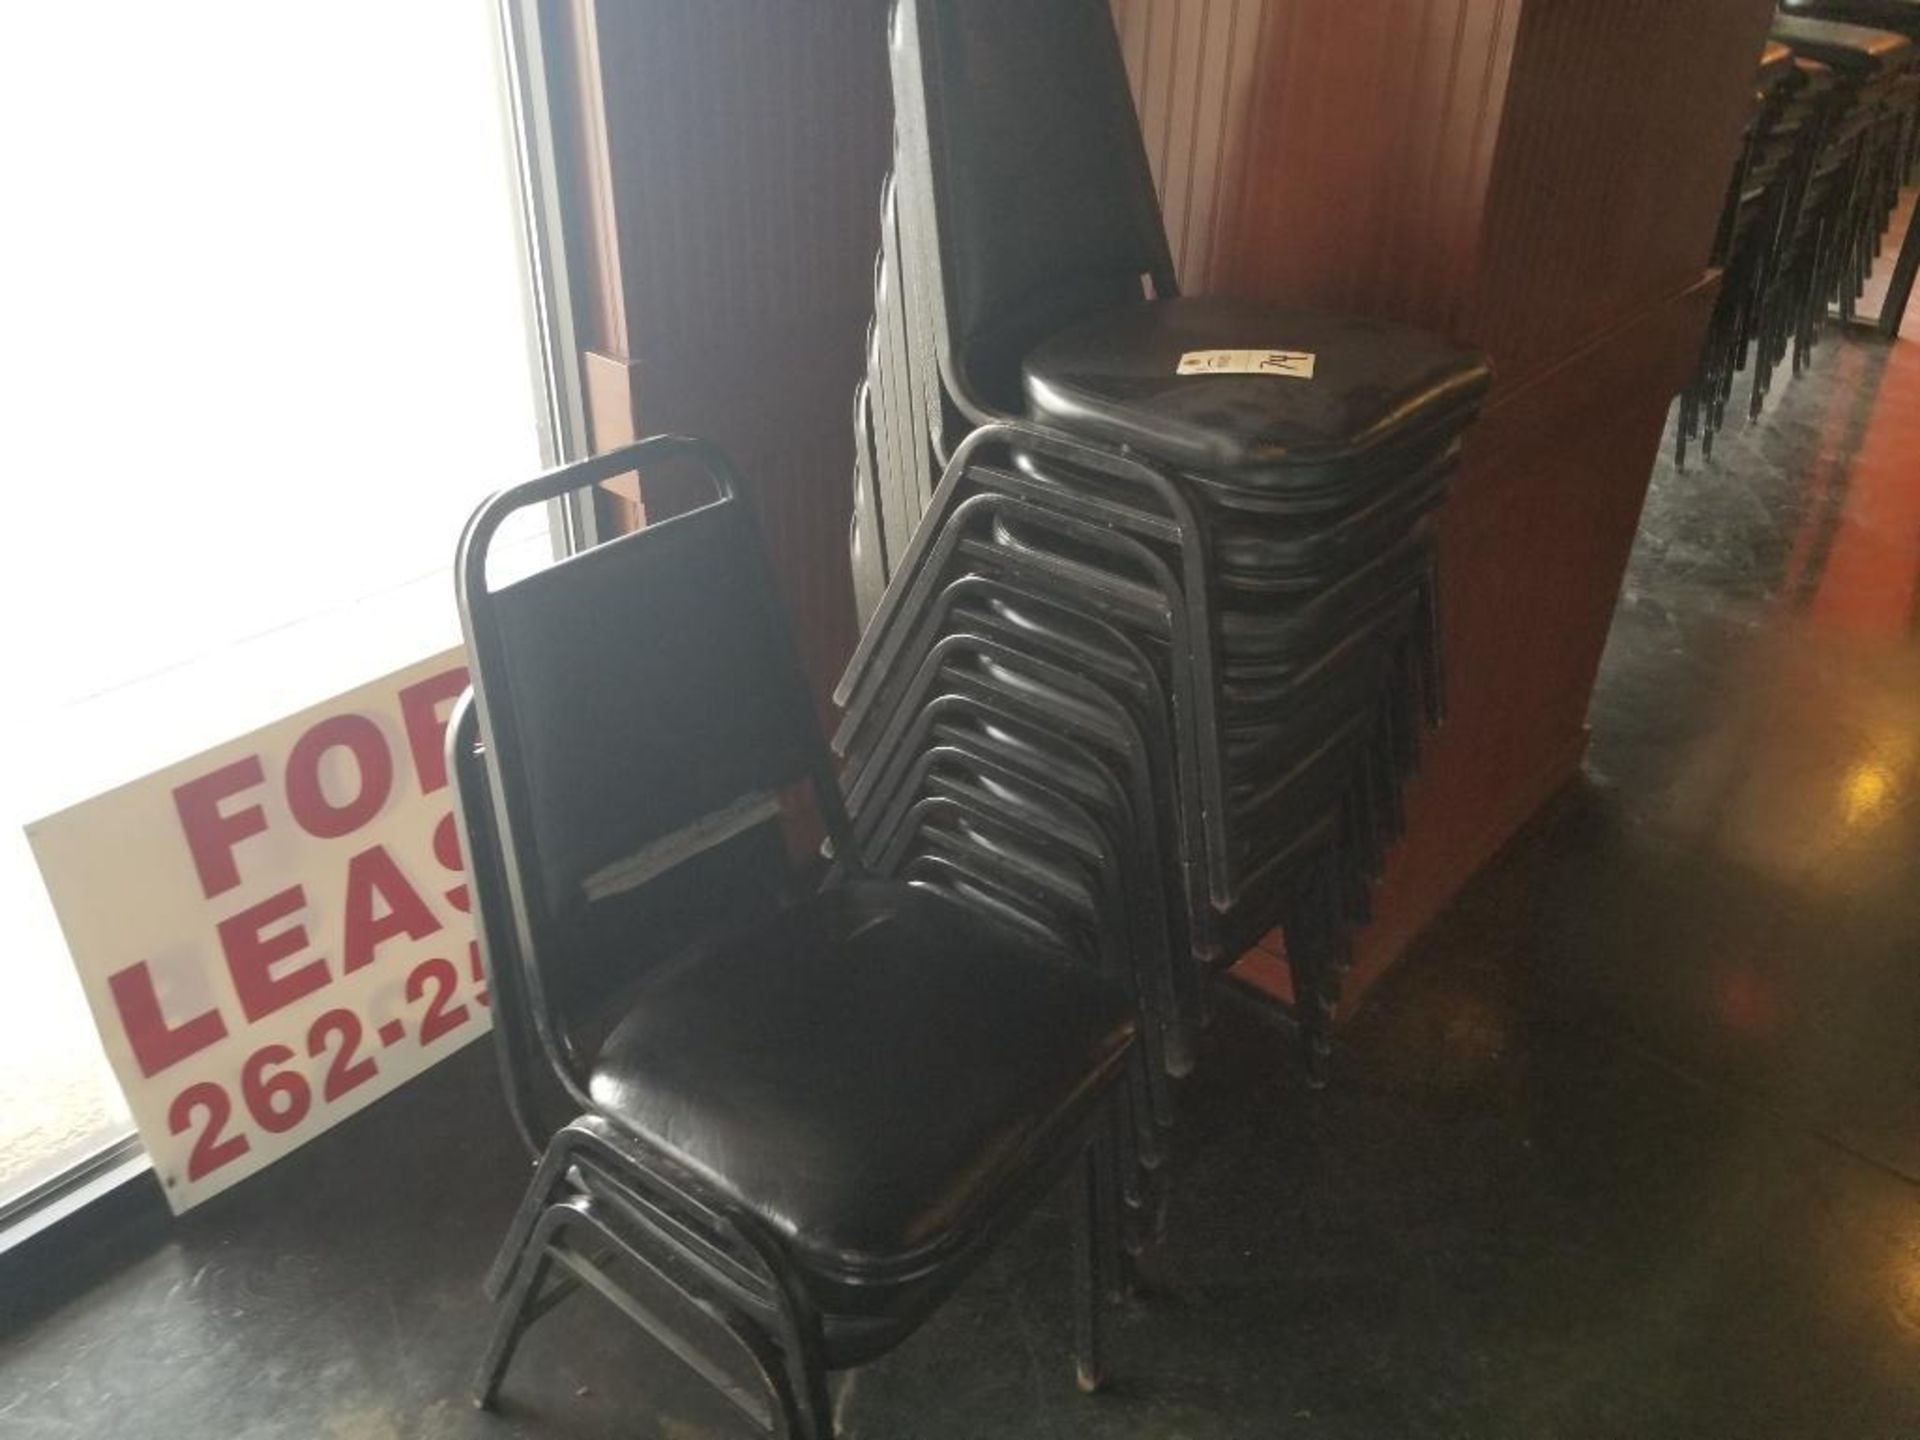 Qty 11 - Restaurant chairs. - Image 2 of 5